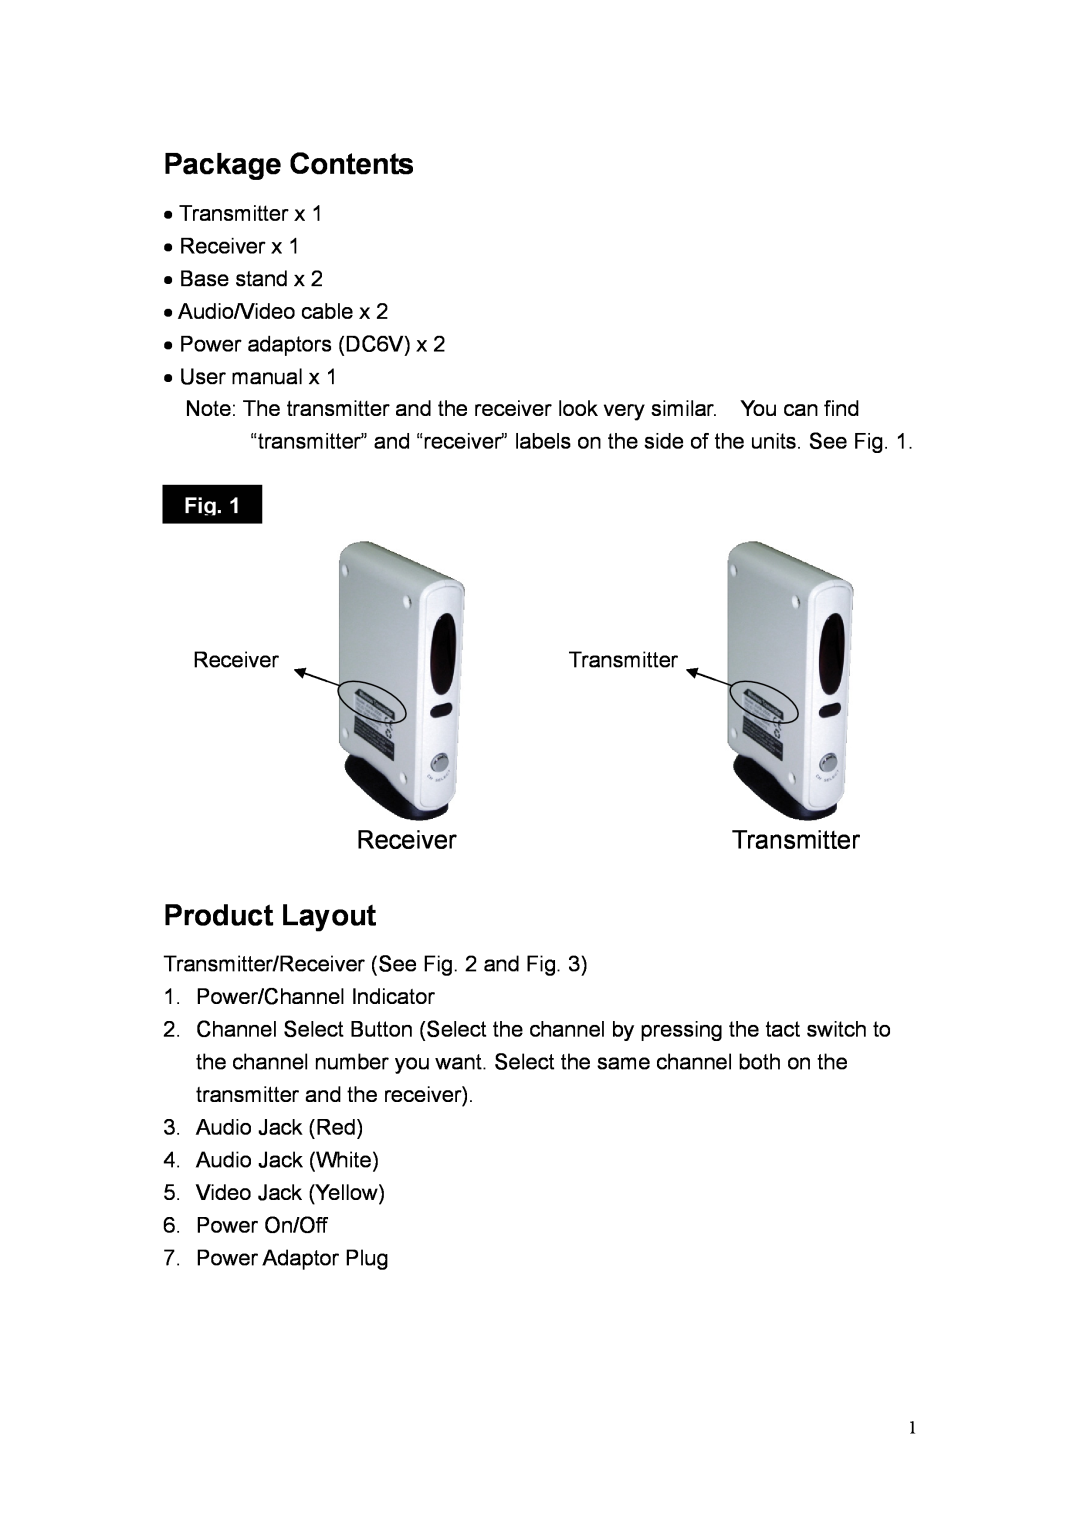 Quatech 2.4GHz user manual Package Contents, Product Layout, ReceiverTransmitter 